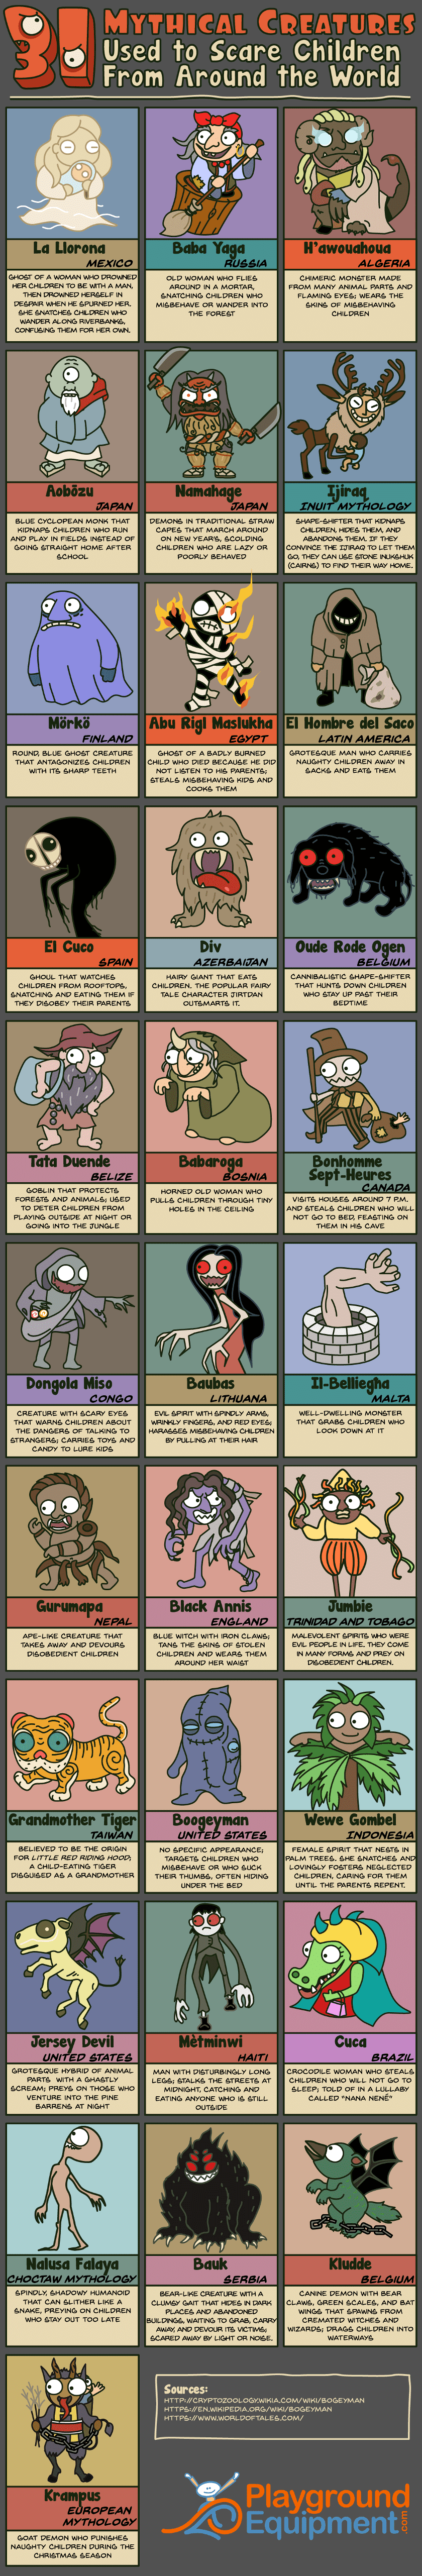 Mythical Creatures Used to Scare Children #infographic